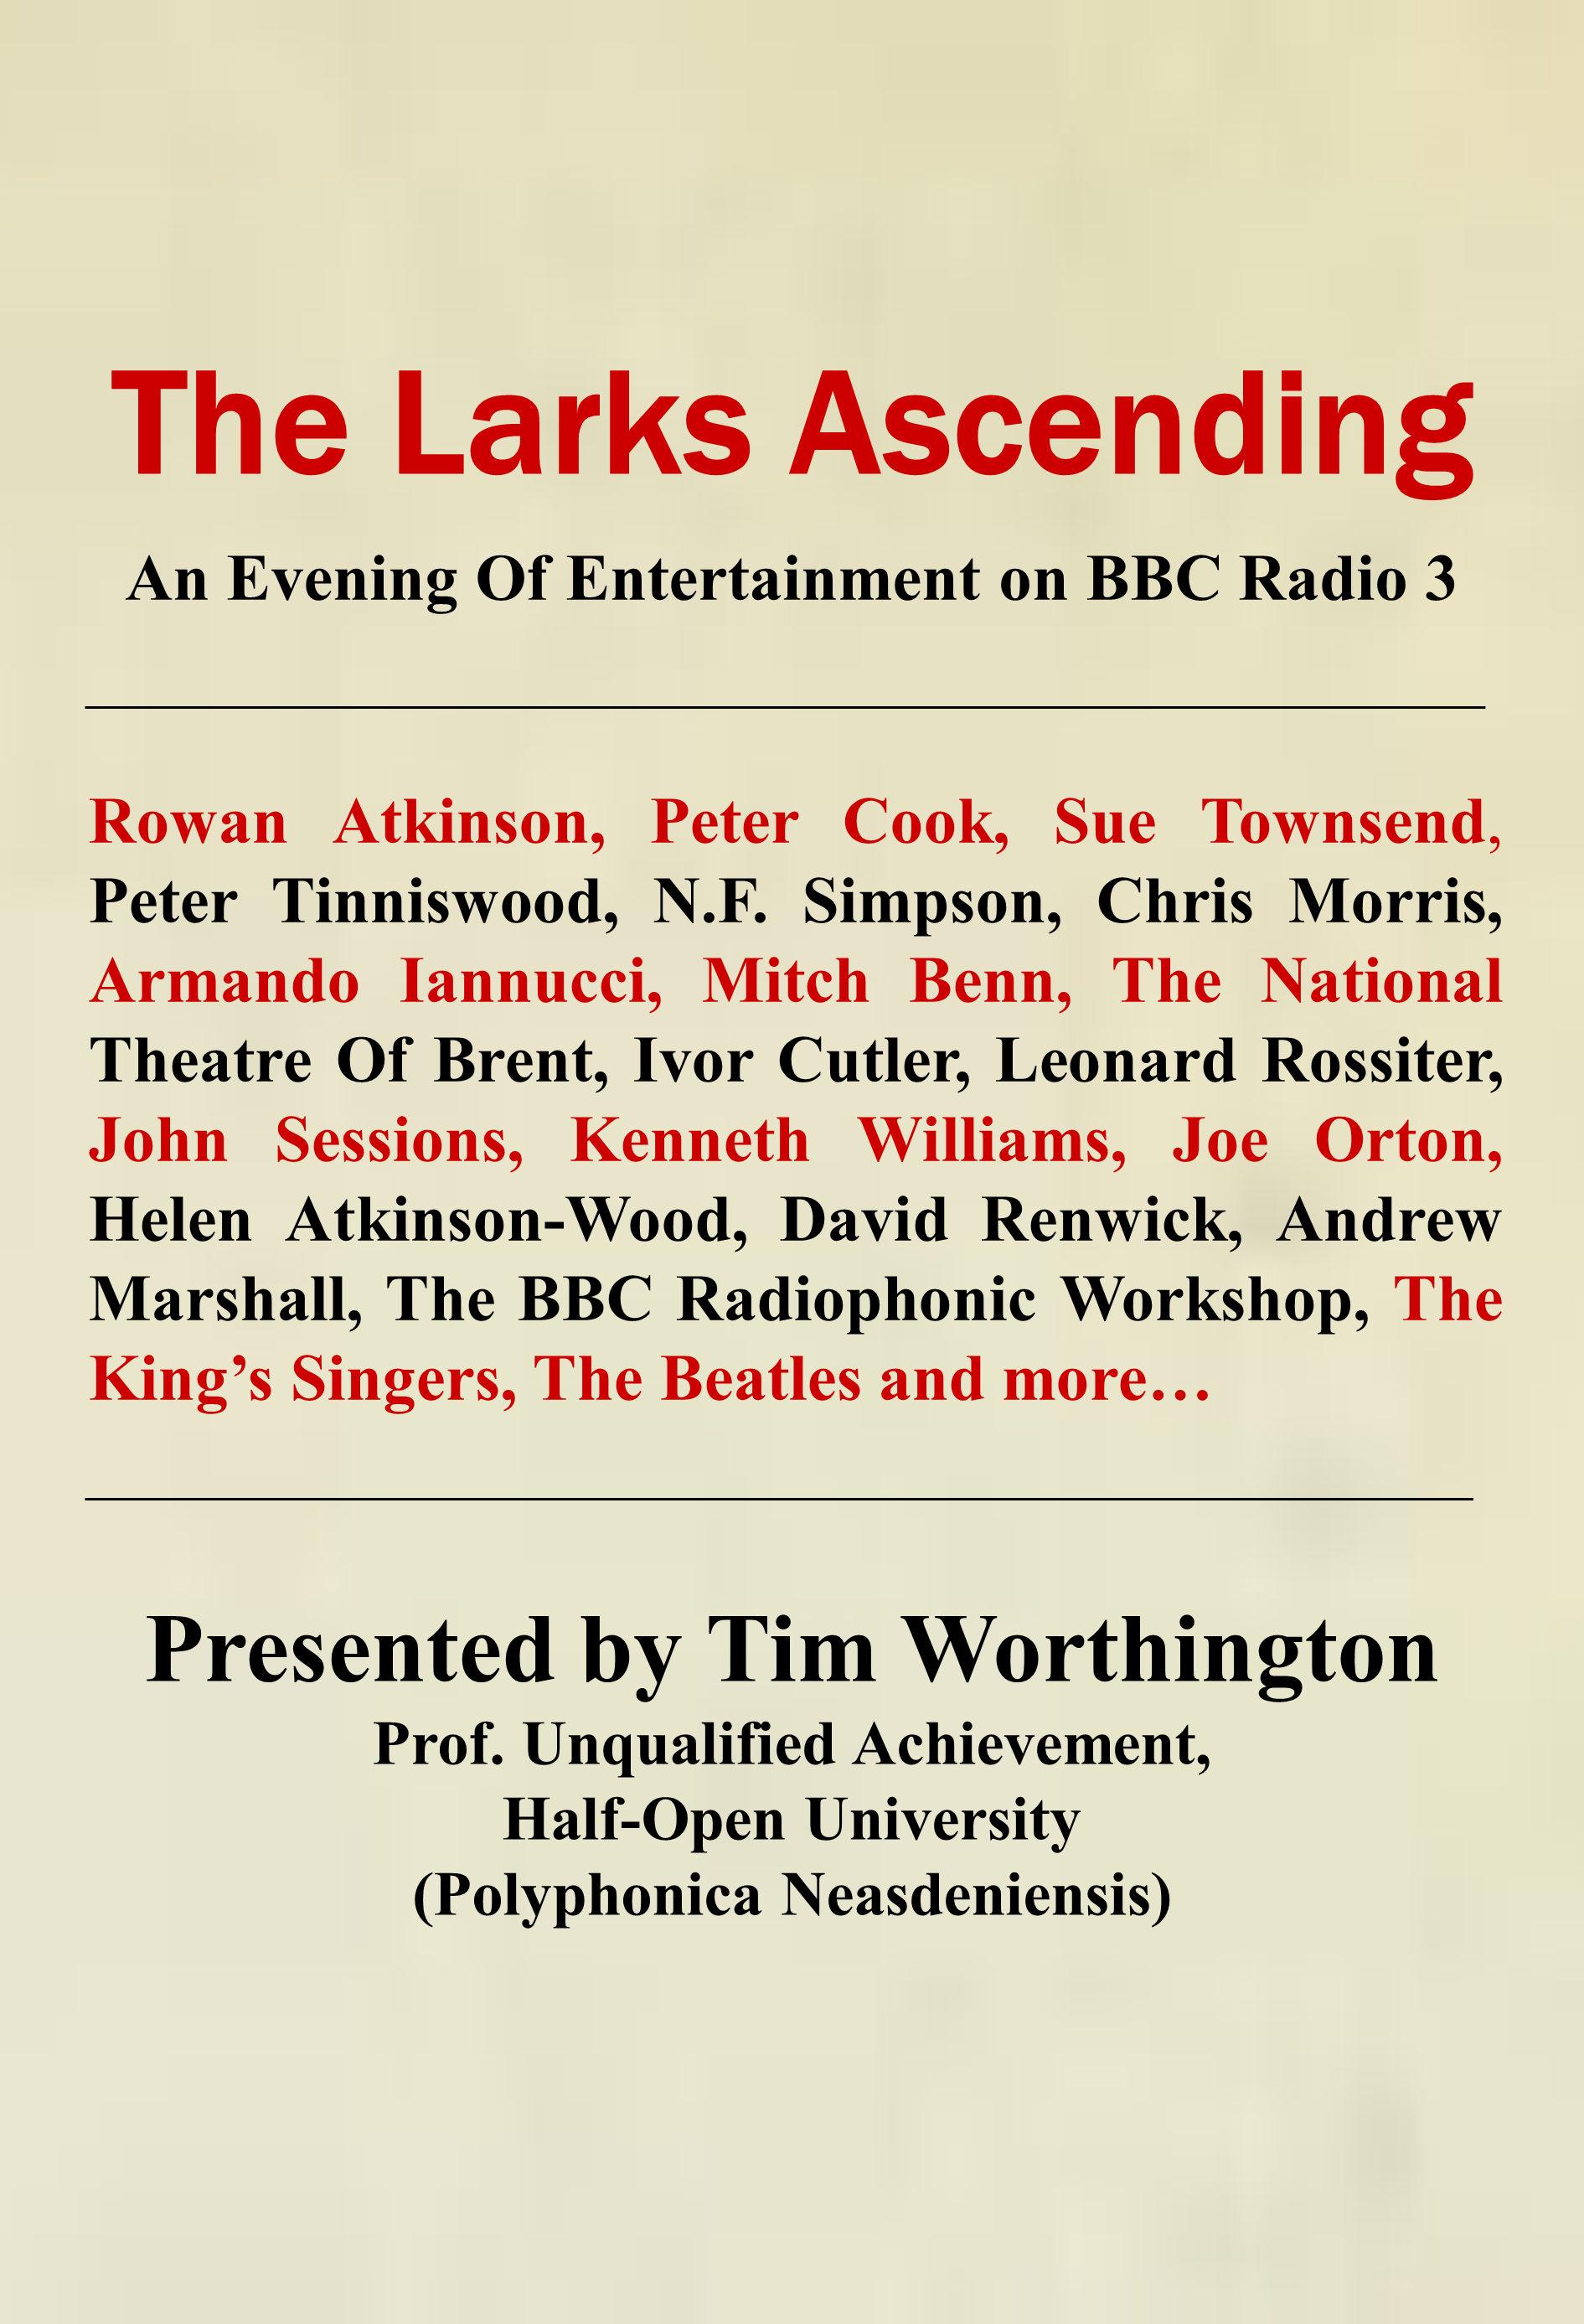 The Larks Ascending - a guide to comedy on BBC Radio 3 by Tim Worthington.